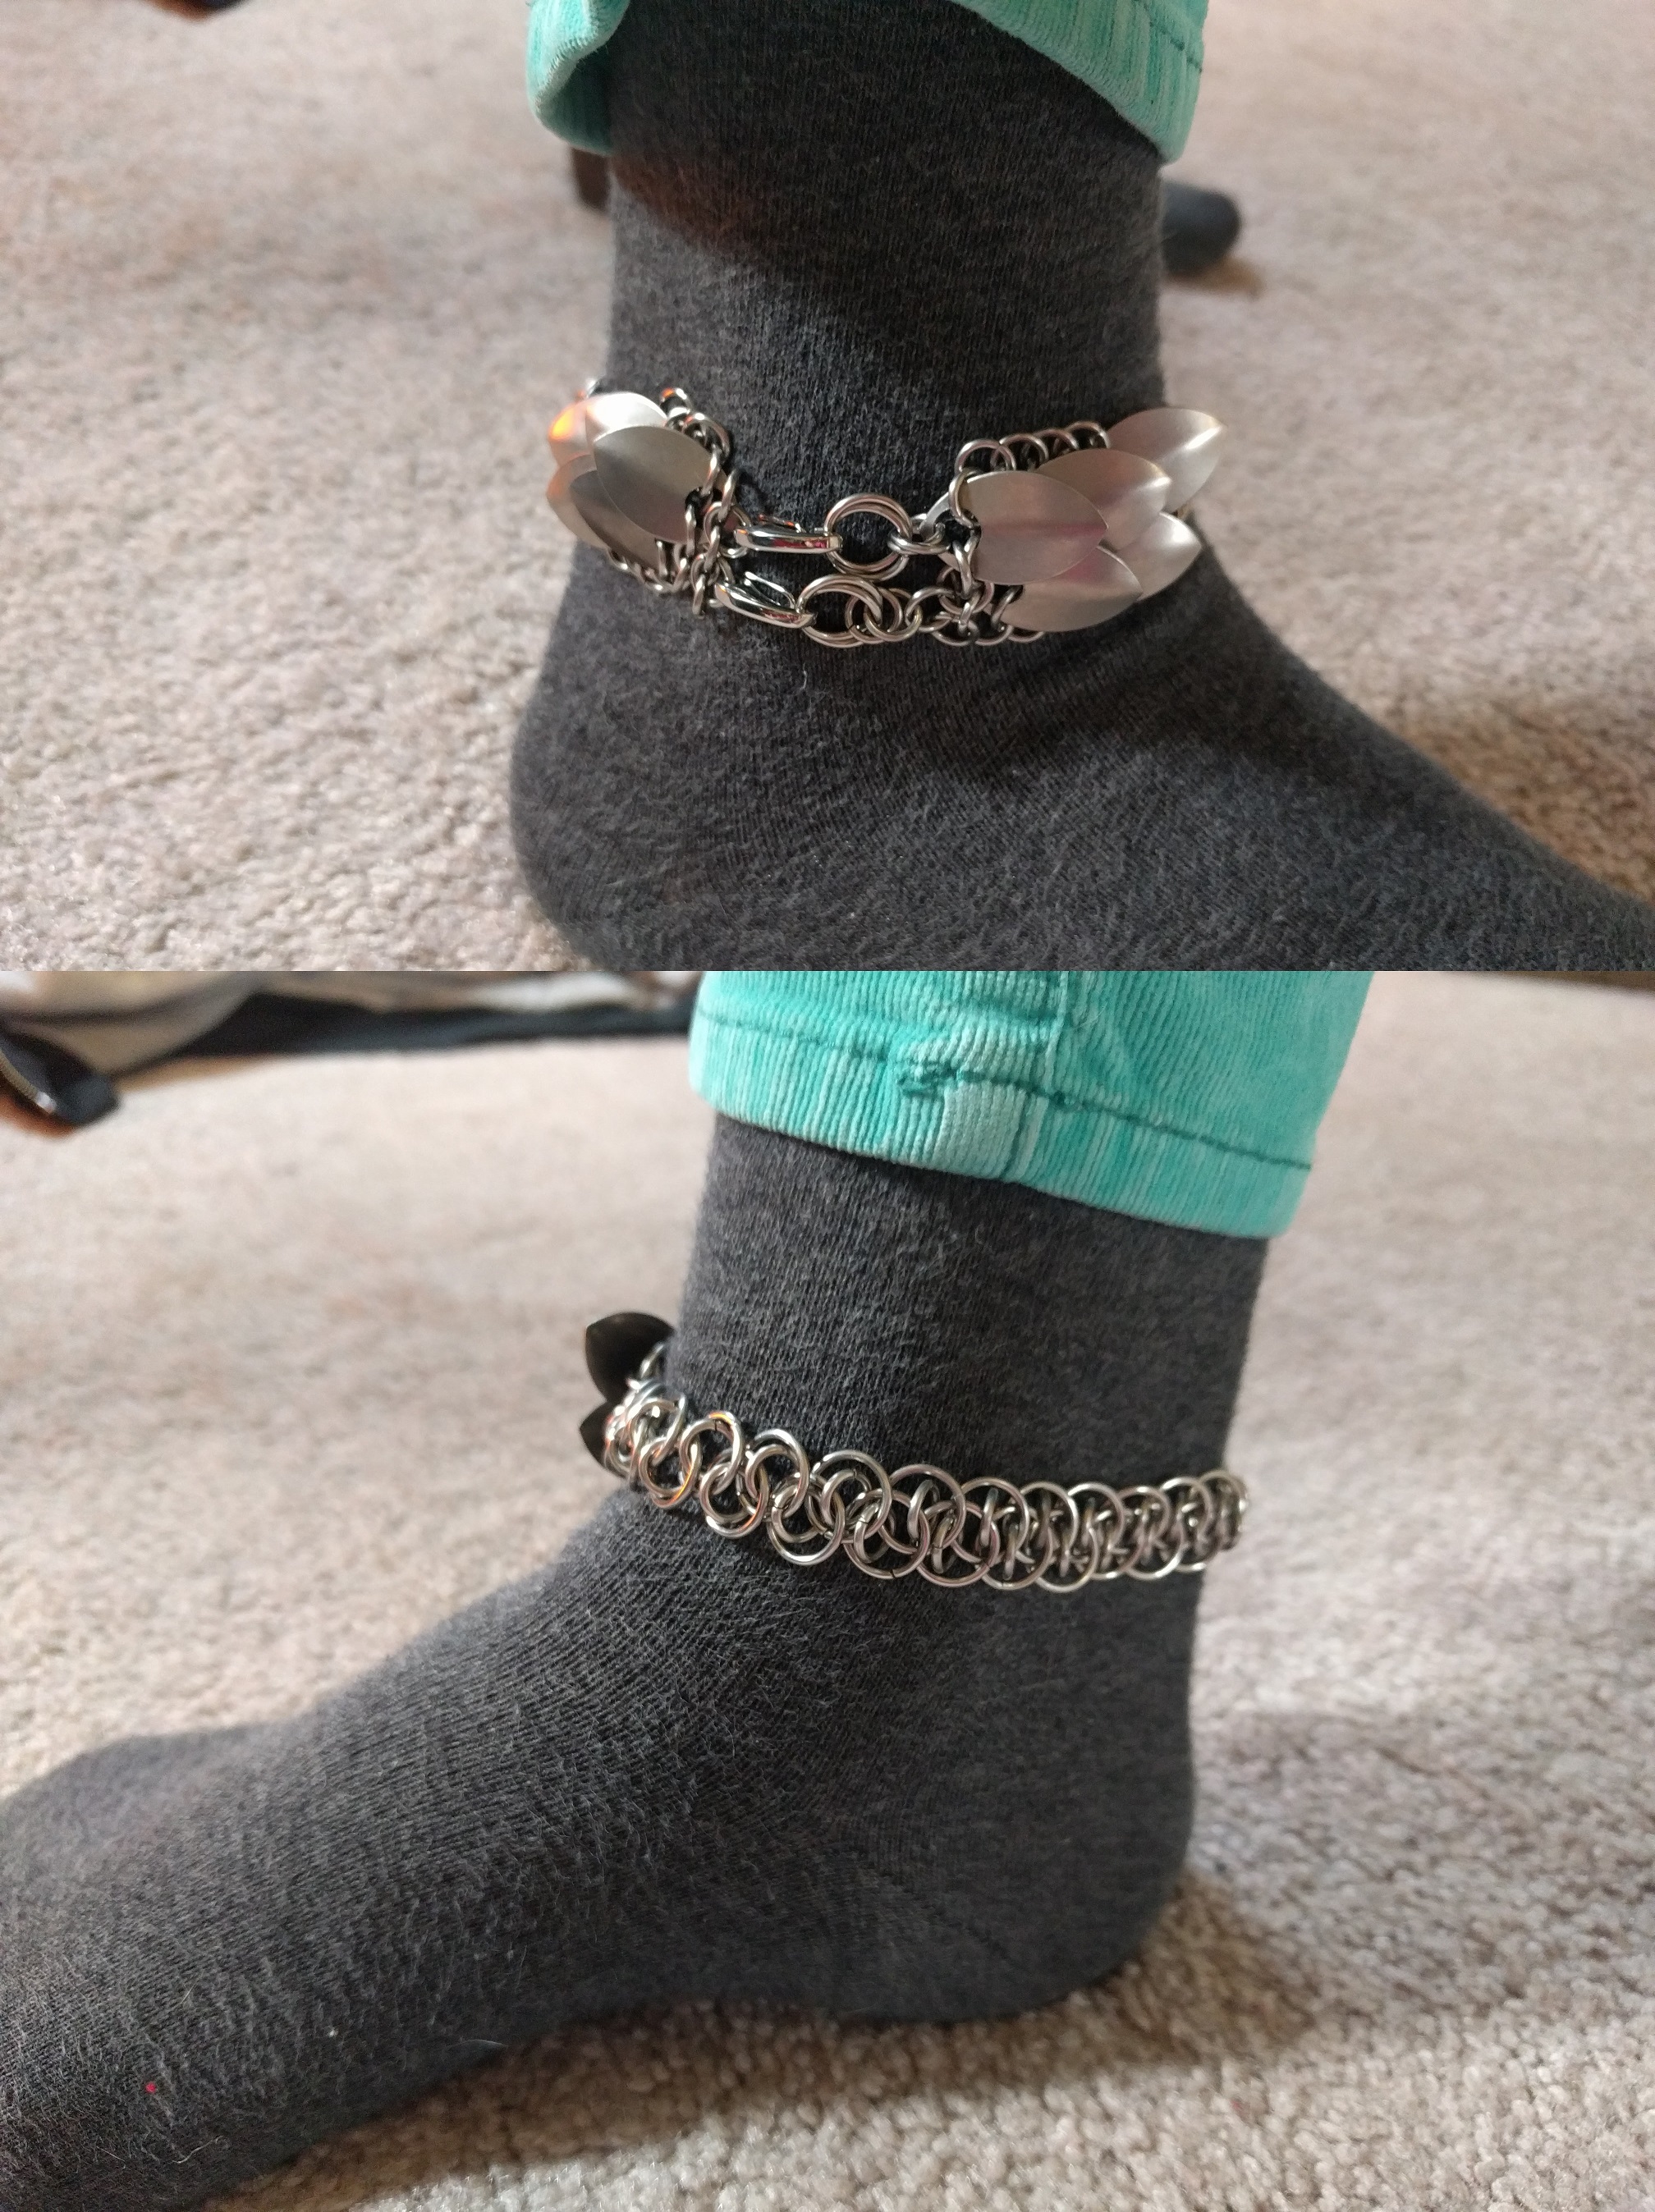 A chainmaille anklet made with G S G weave, with scales around the clasp resembling wings.